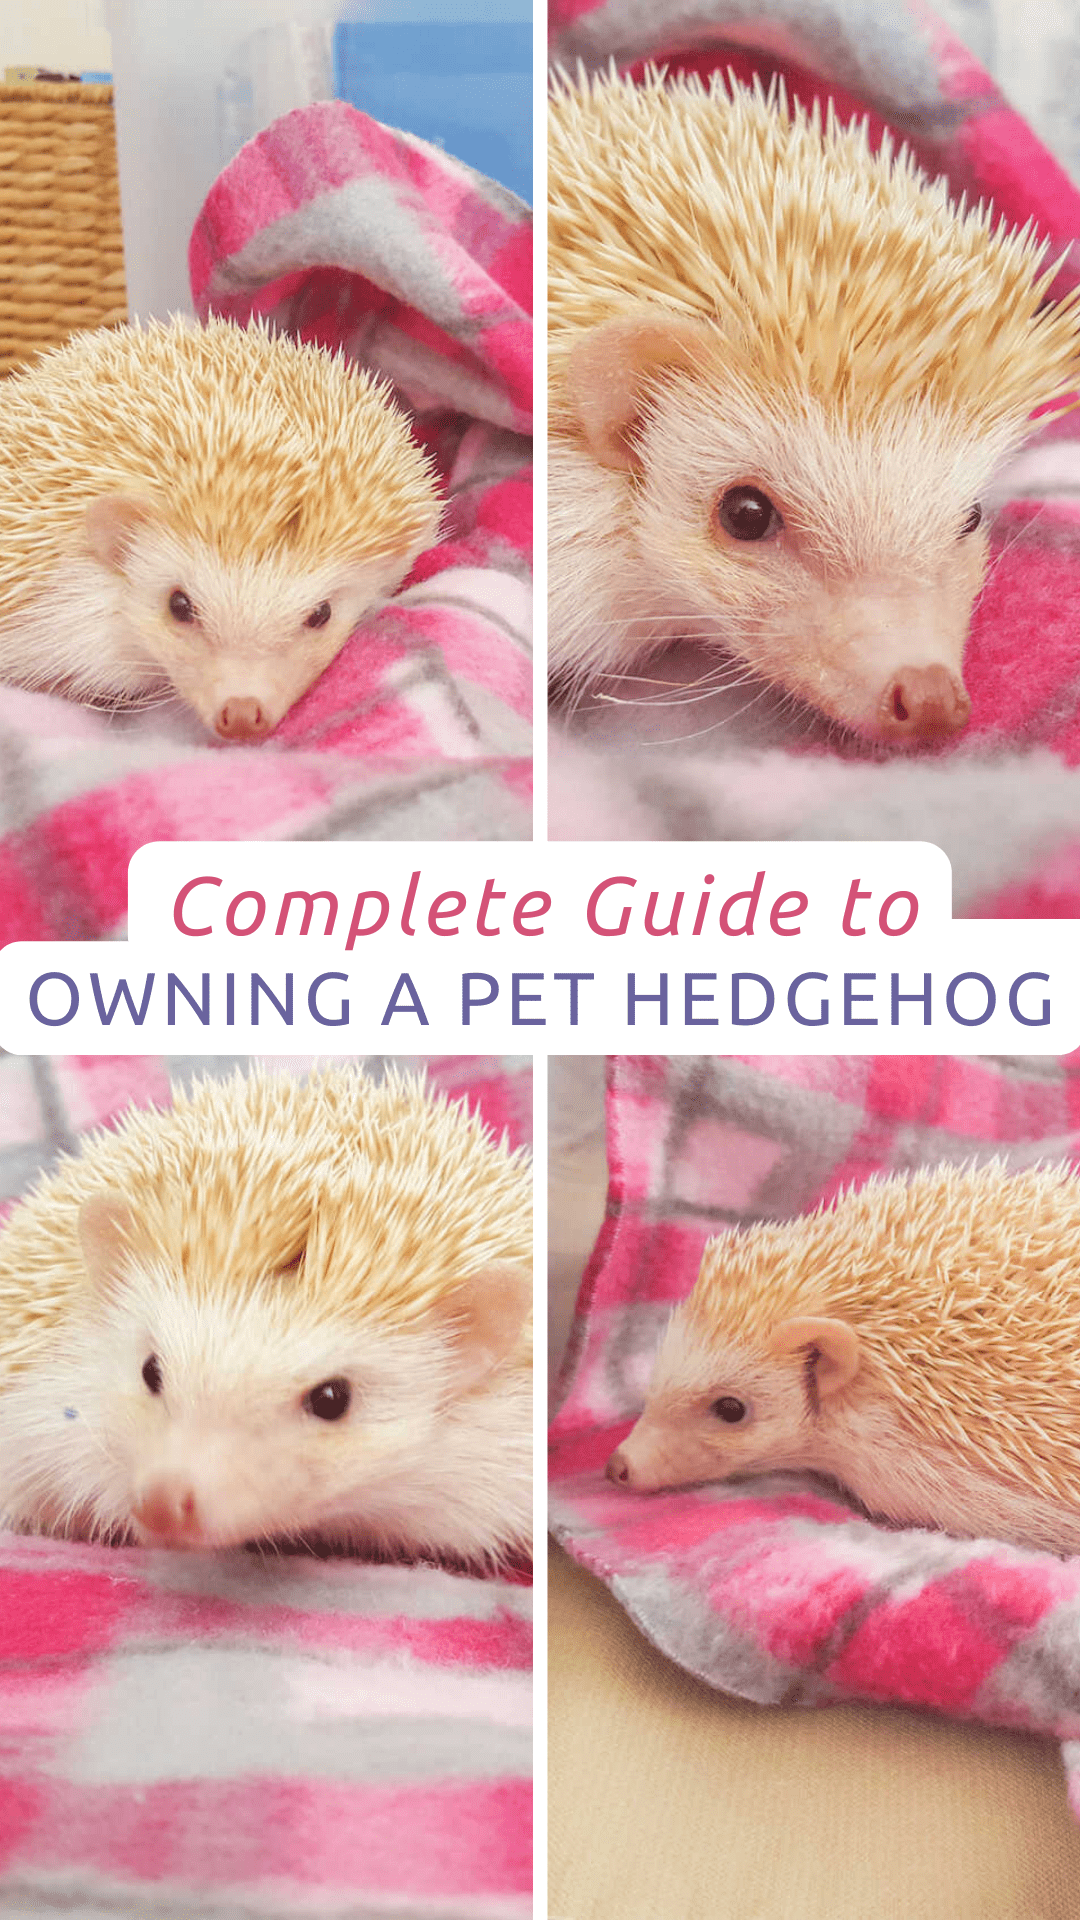 Complete Guide to Owning a Pet Hedgehog